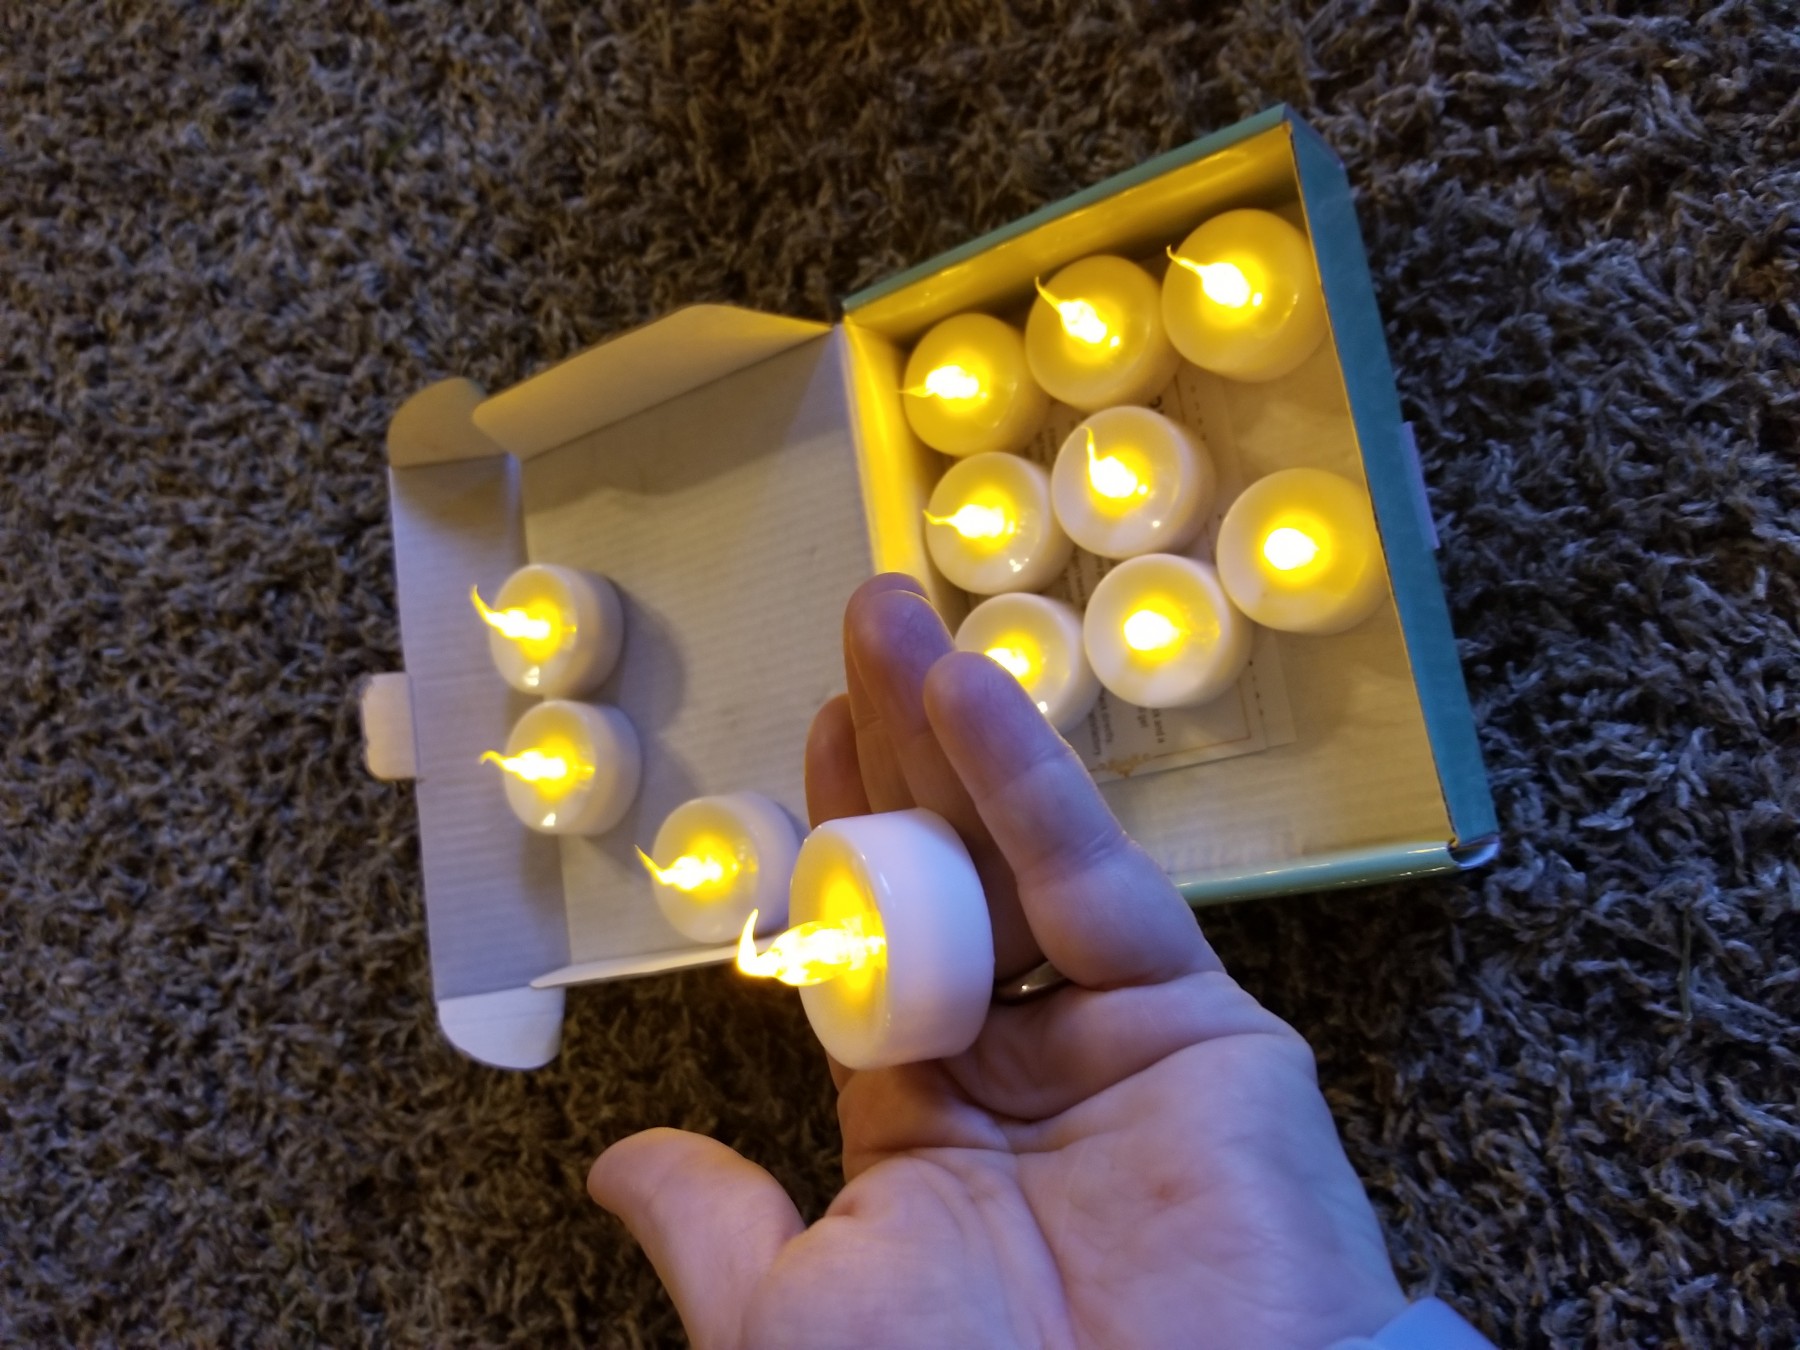 This Tea lights are  Super cool!